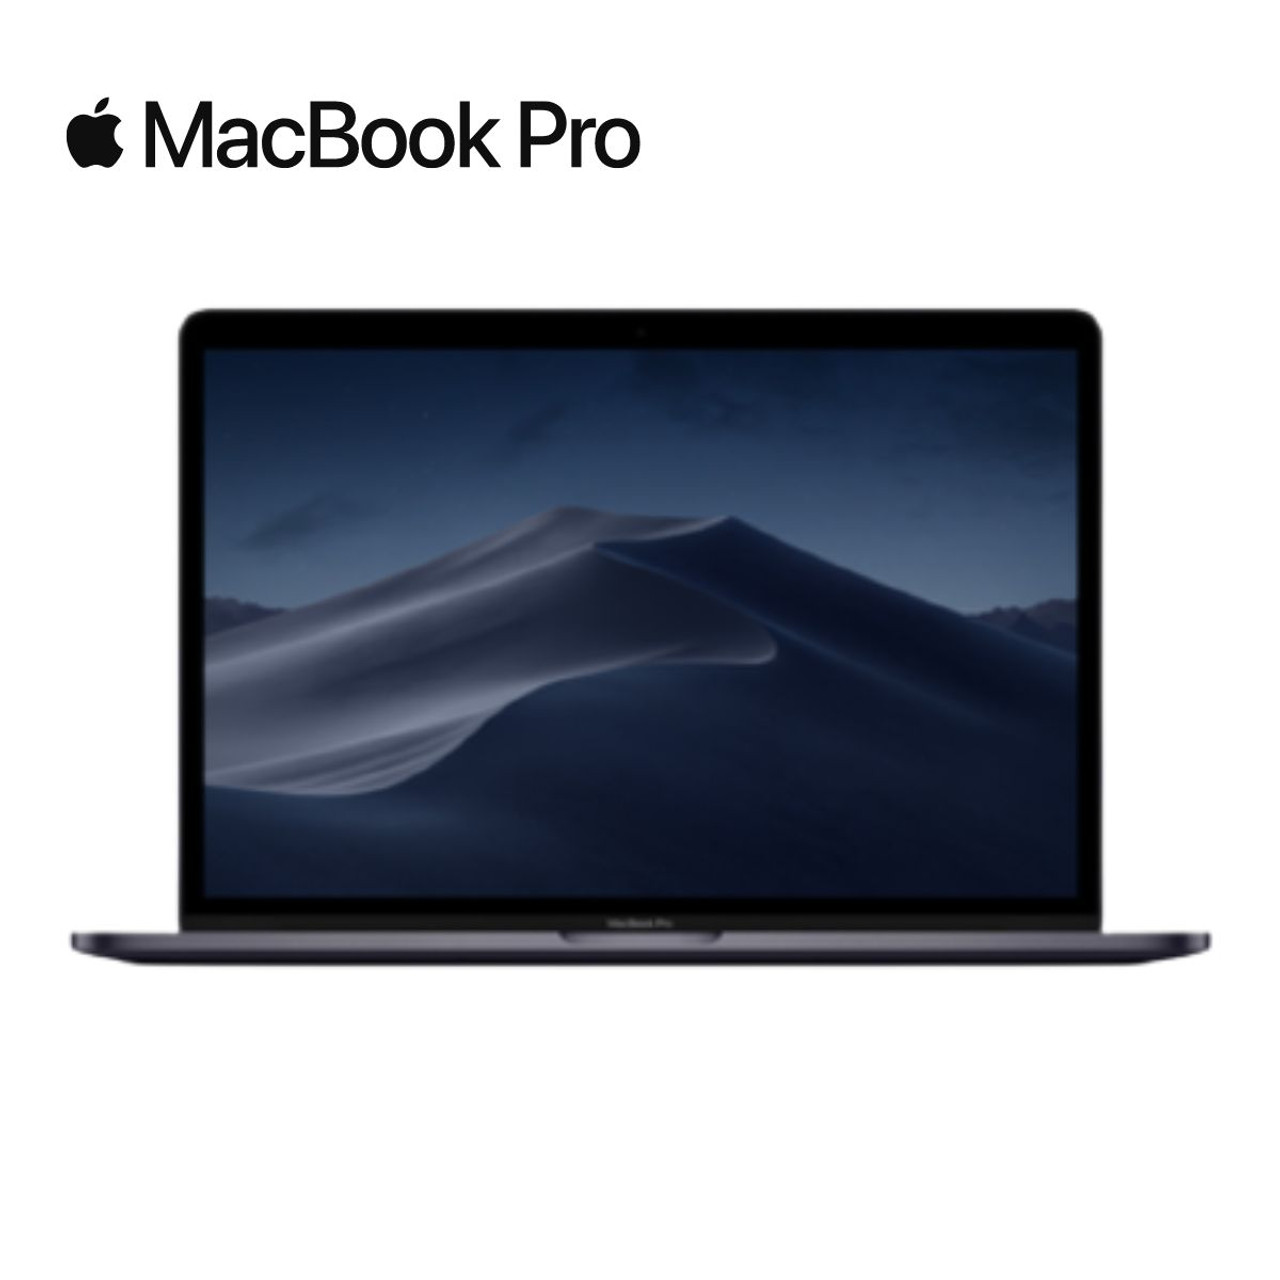 Apple® MacBook Pro with Touch Bar, 2.6GHz Core i7, 16GB RAM, 256GB SSD, MLH32LL/A product image